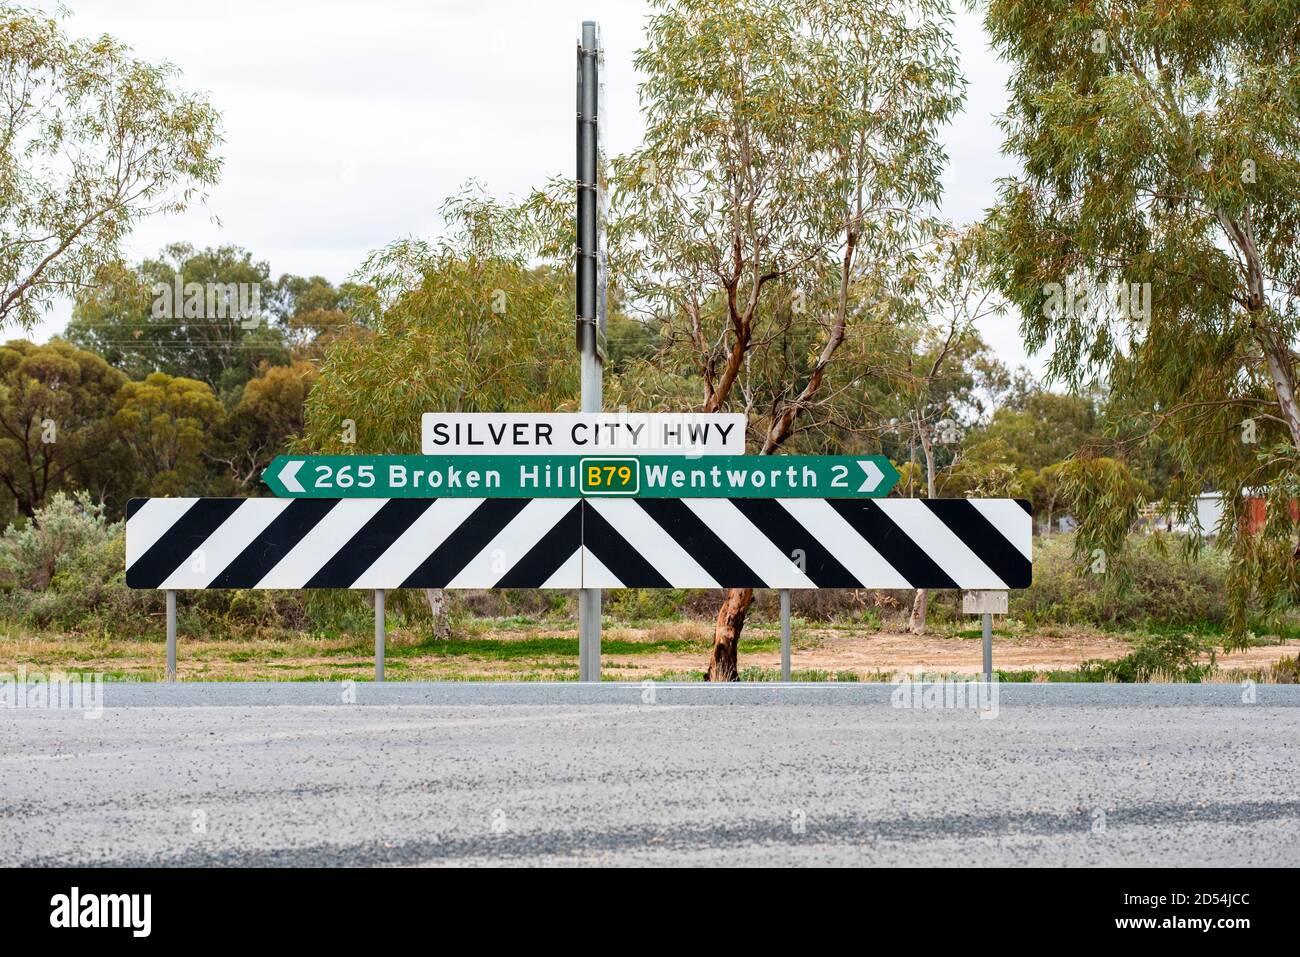 Sign for Broken Hill and Wentworth on the silver city hwy in NSW Australia Stock Photo